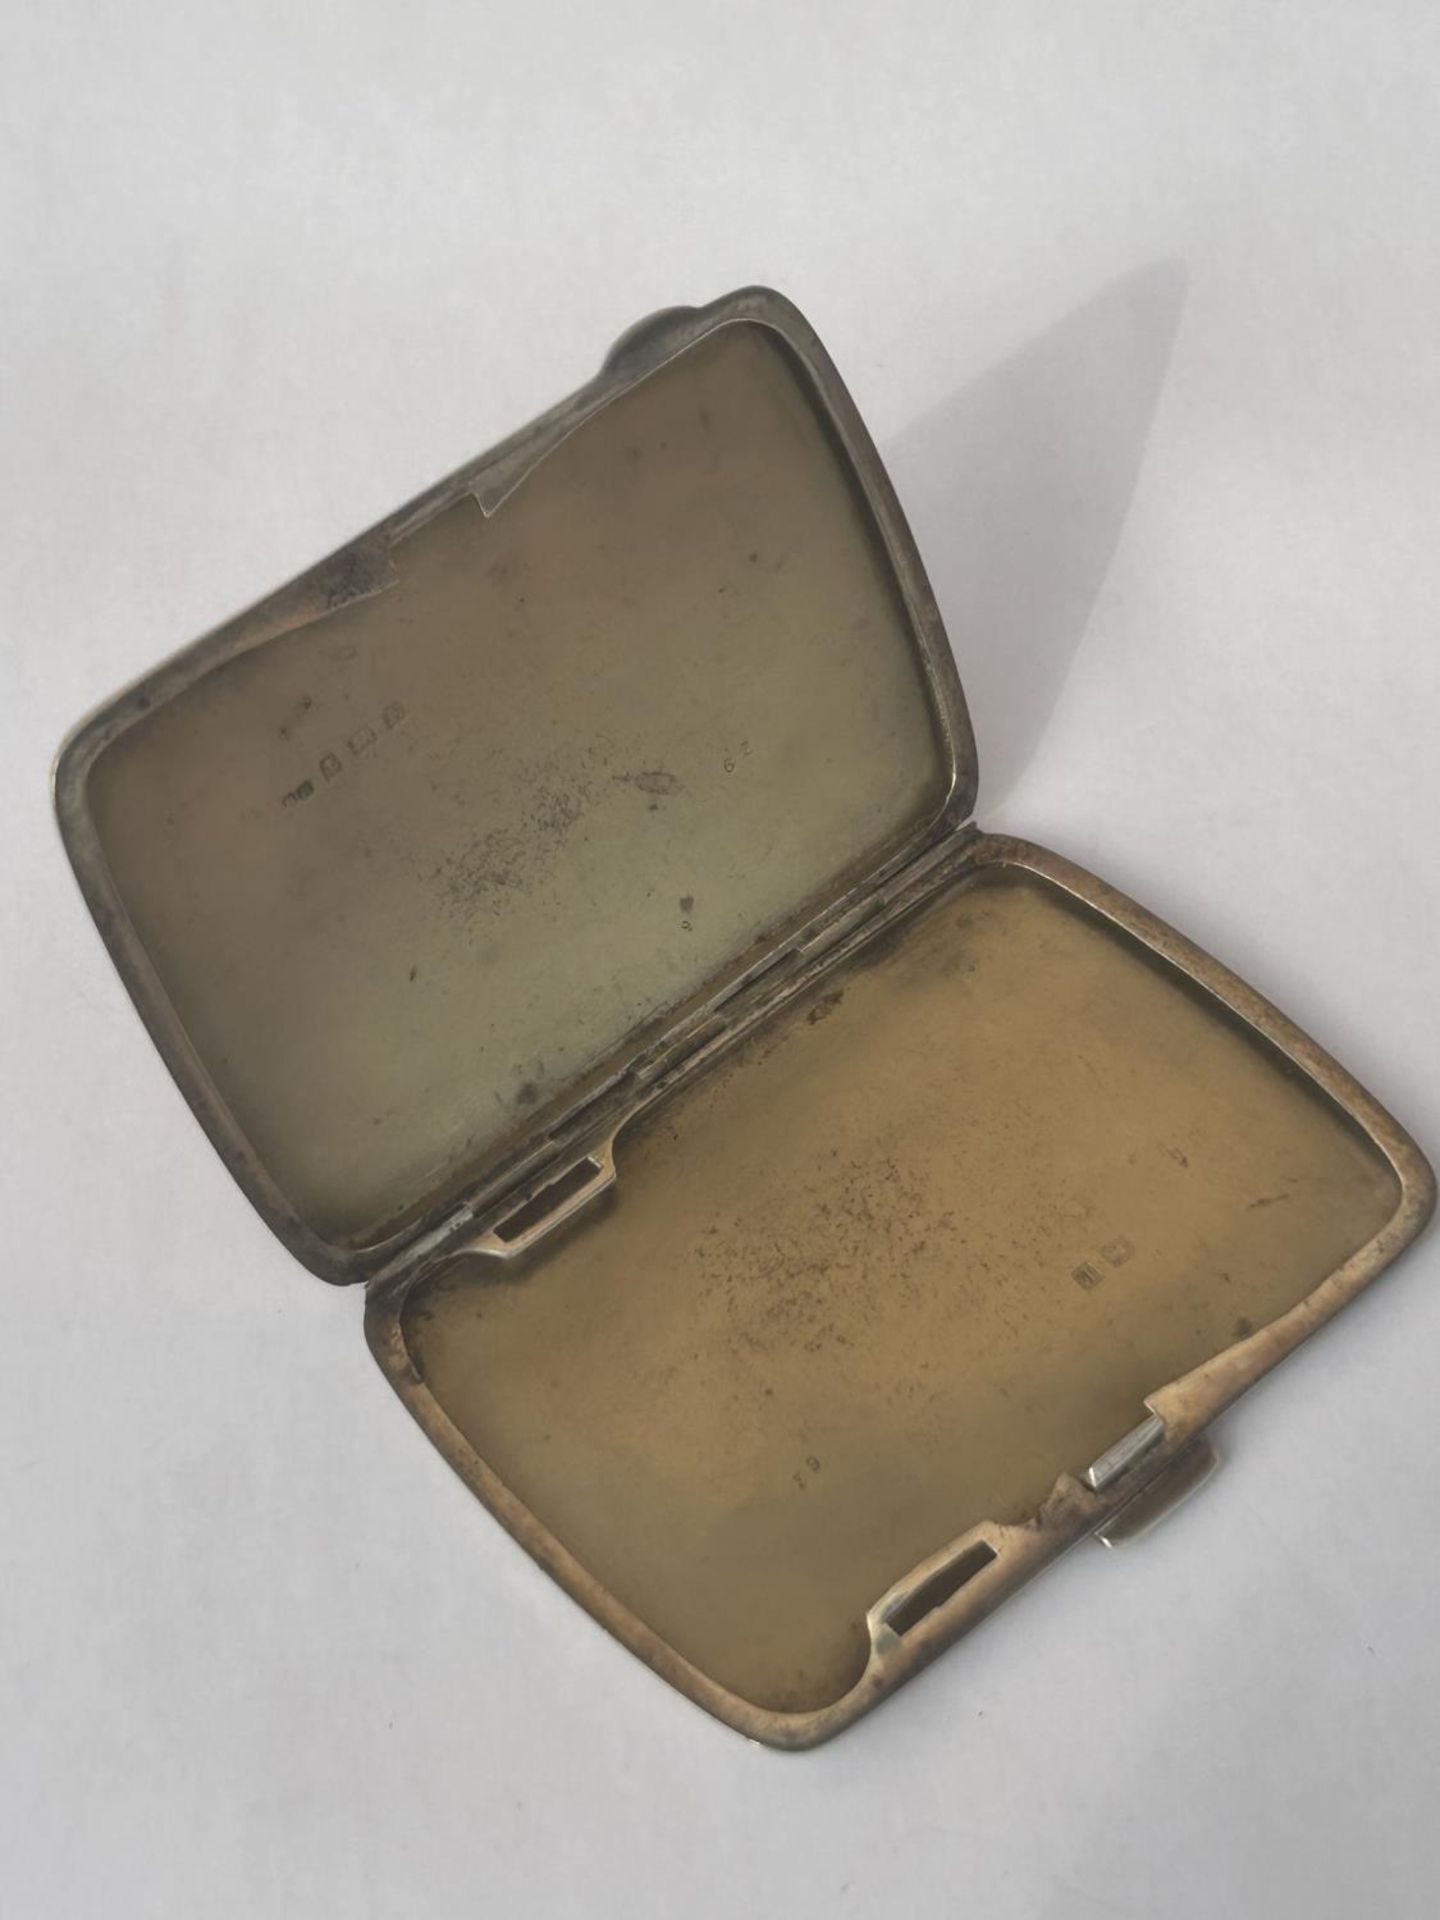 A GEORGE V HALLMARKED SILVER AND GUILLOCHE ENAMELED CIGARETTE CASE, BY HENRY MATTHEWS BIRMINGHAM - Image 4 of 5